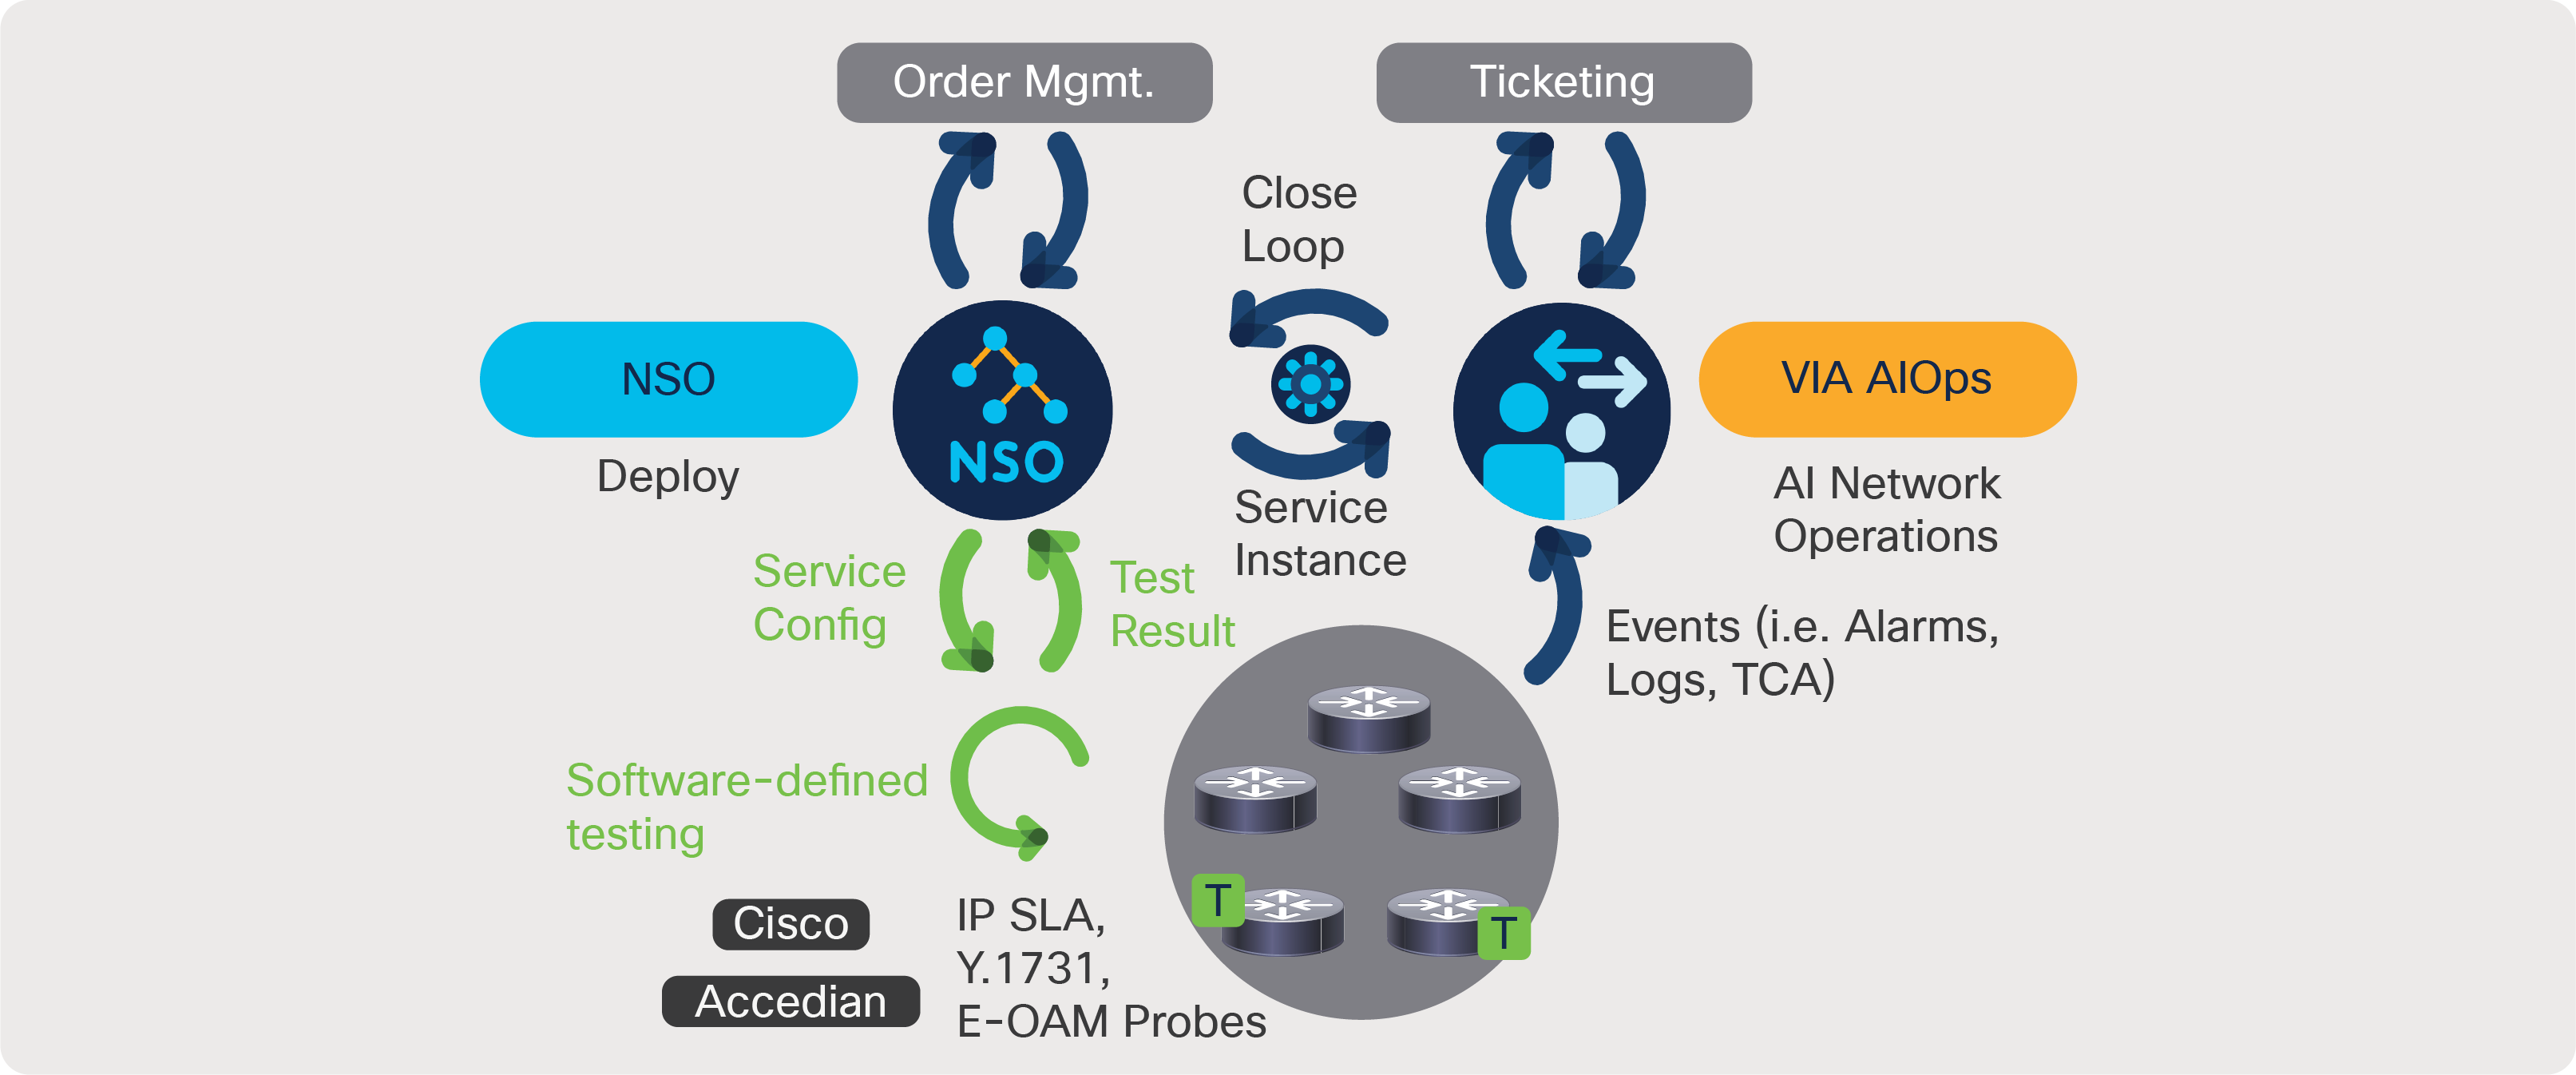 Cisco NSO interplays with Vitria VIA AIOps as part of self-healing closed-loop automation